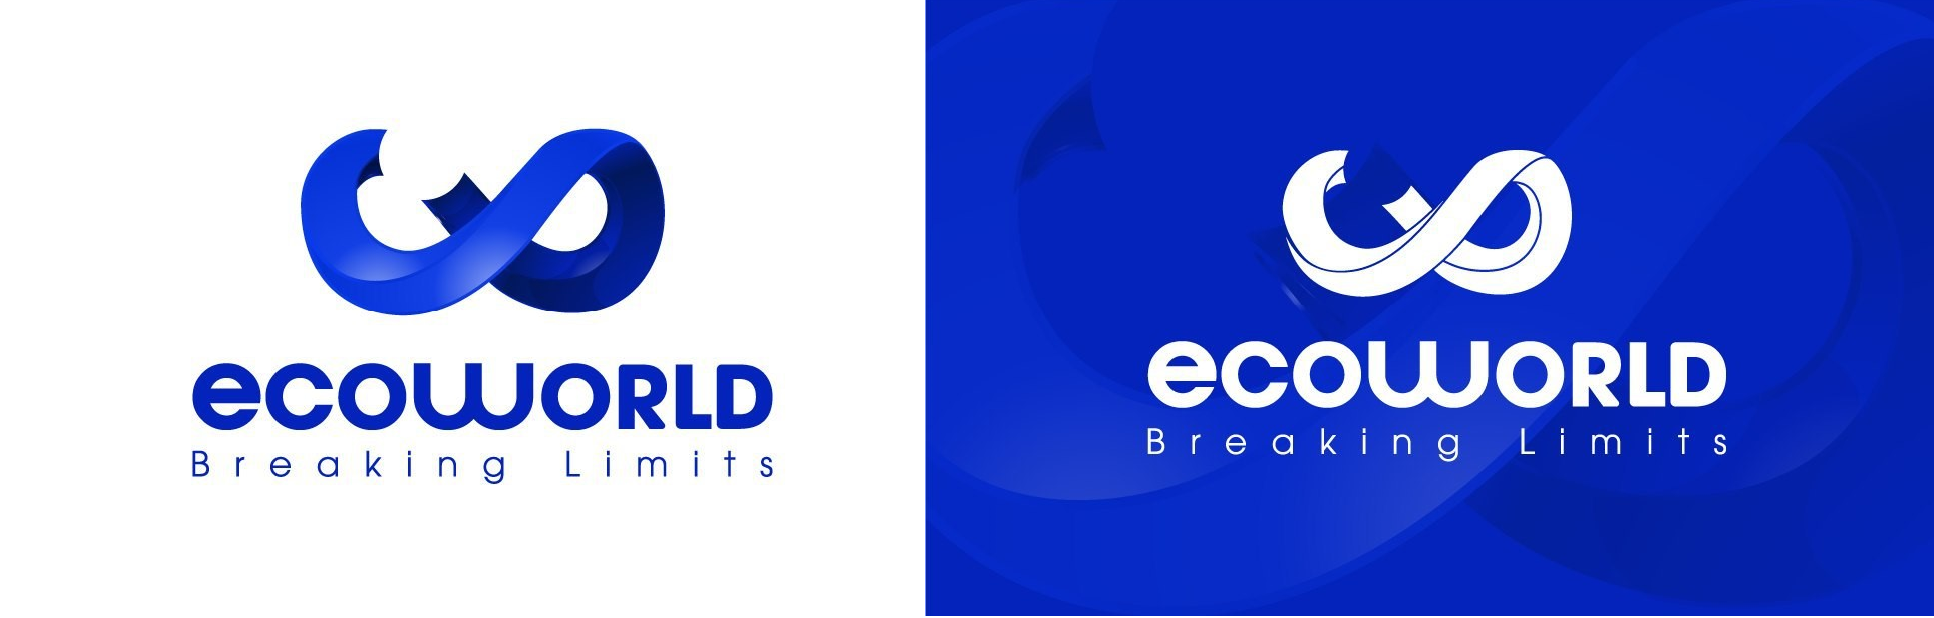 New brand identity from Ecoworld